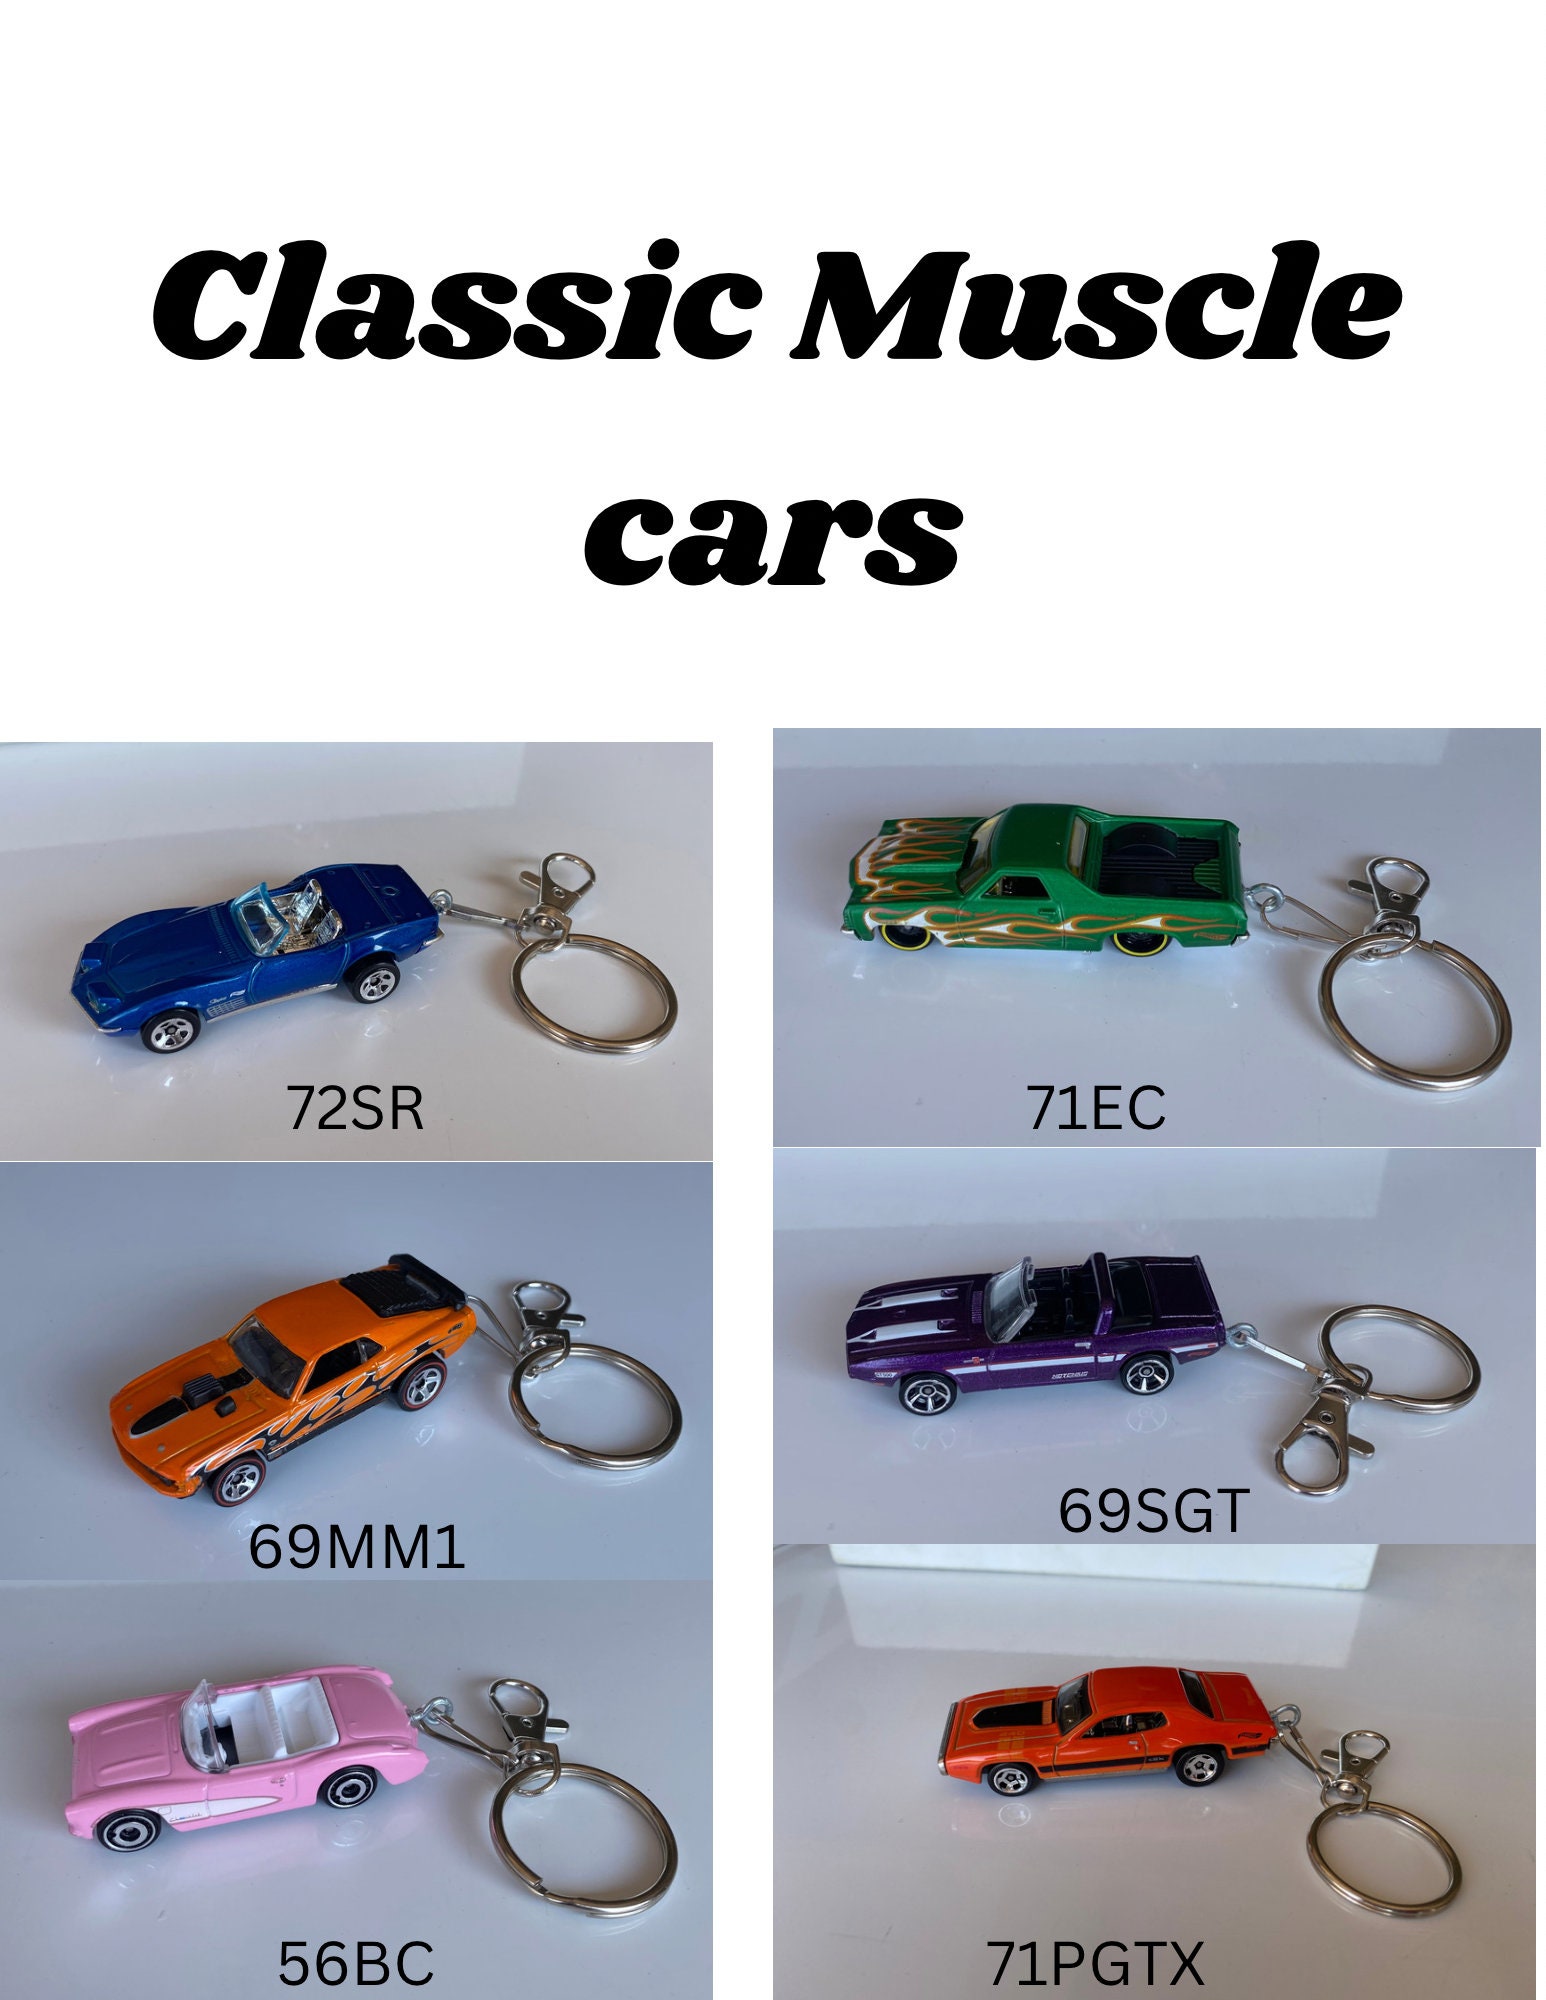 ** 1 VINTAGE 70S LEATHER DUSTER MUSCLE CAR KEYCHAIN PORTE CLEF CAR  AUTOMOBILE *